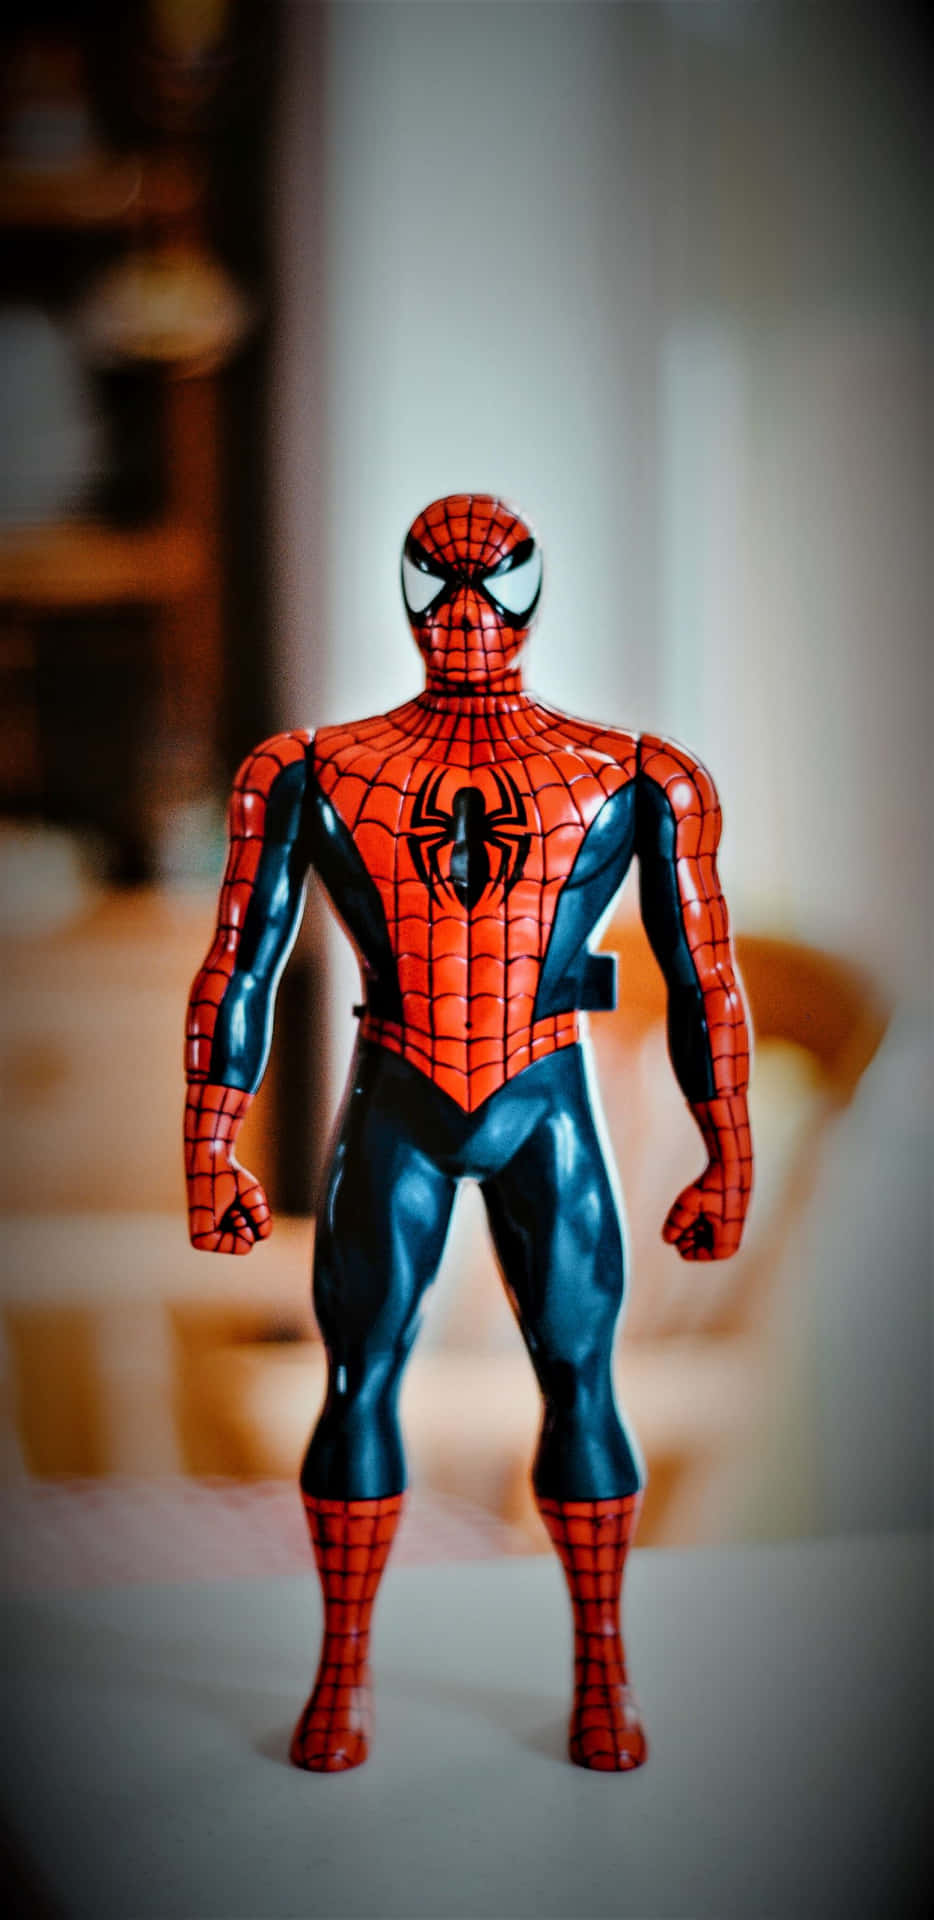 Pixel 3xl Marvel Background Spiderman Toy On A Table